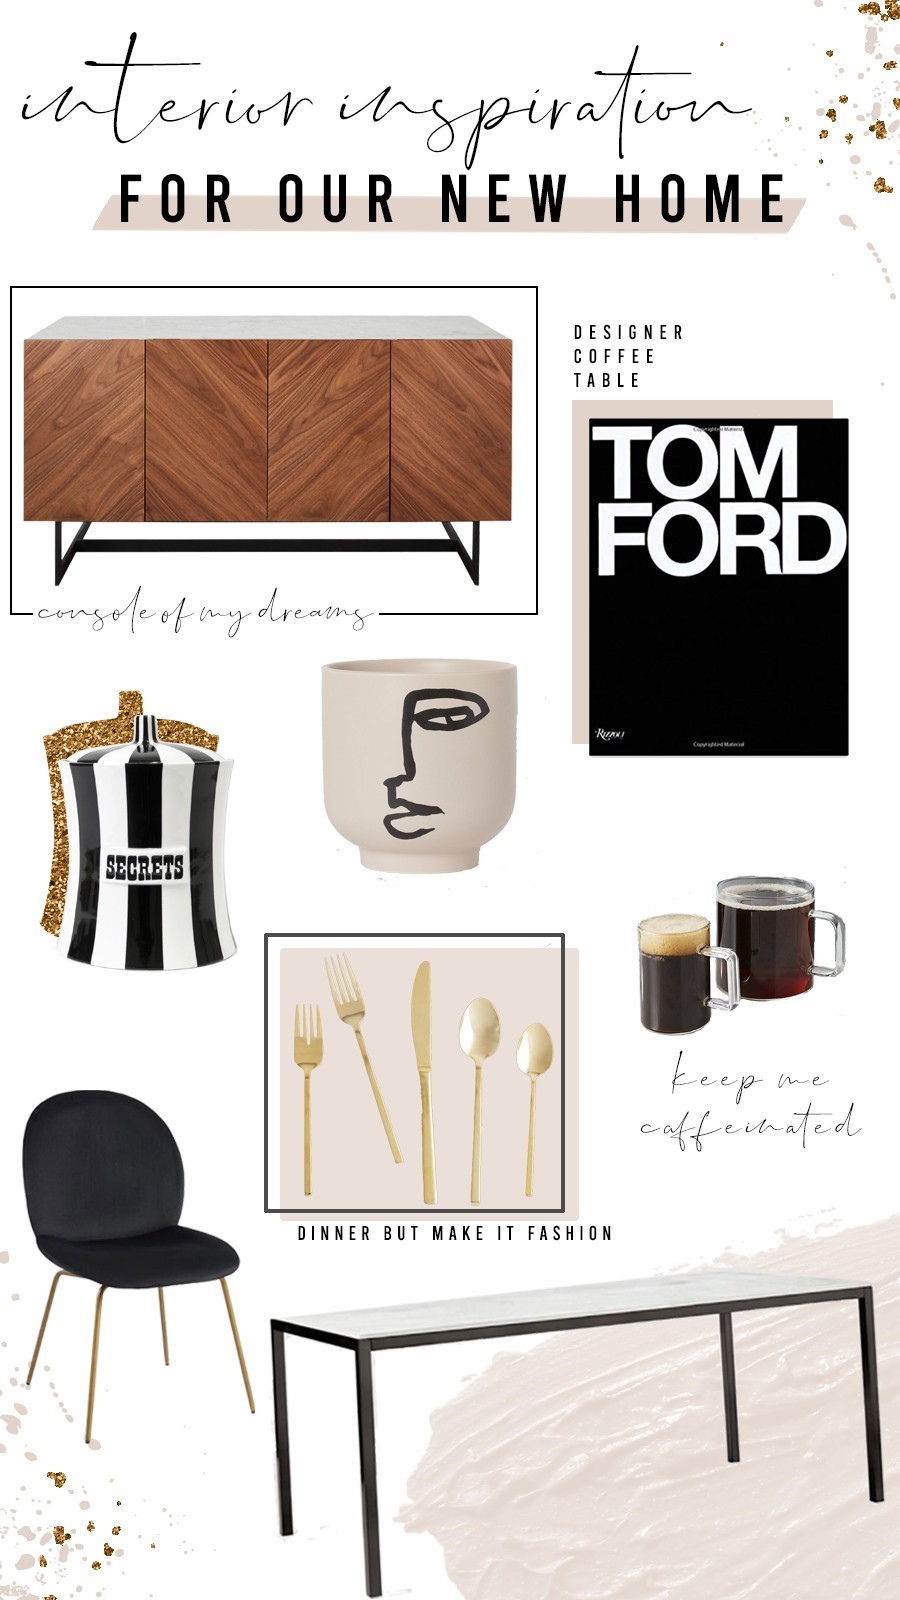 Simone At Home – Interior Inspiration For Our New Home